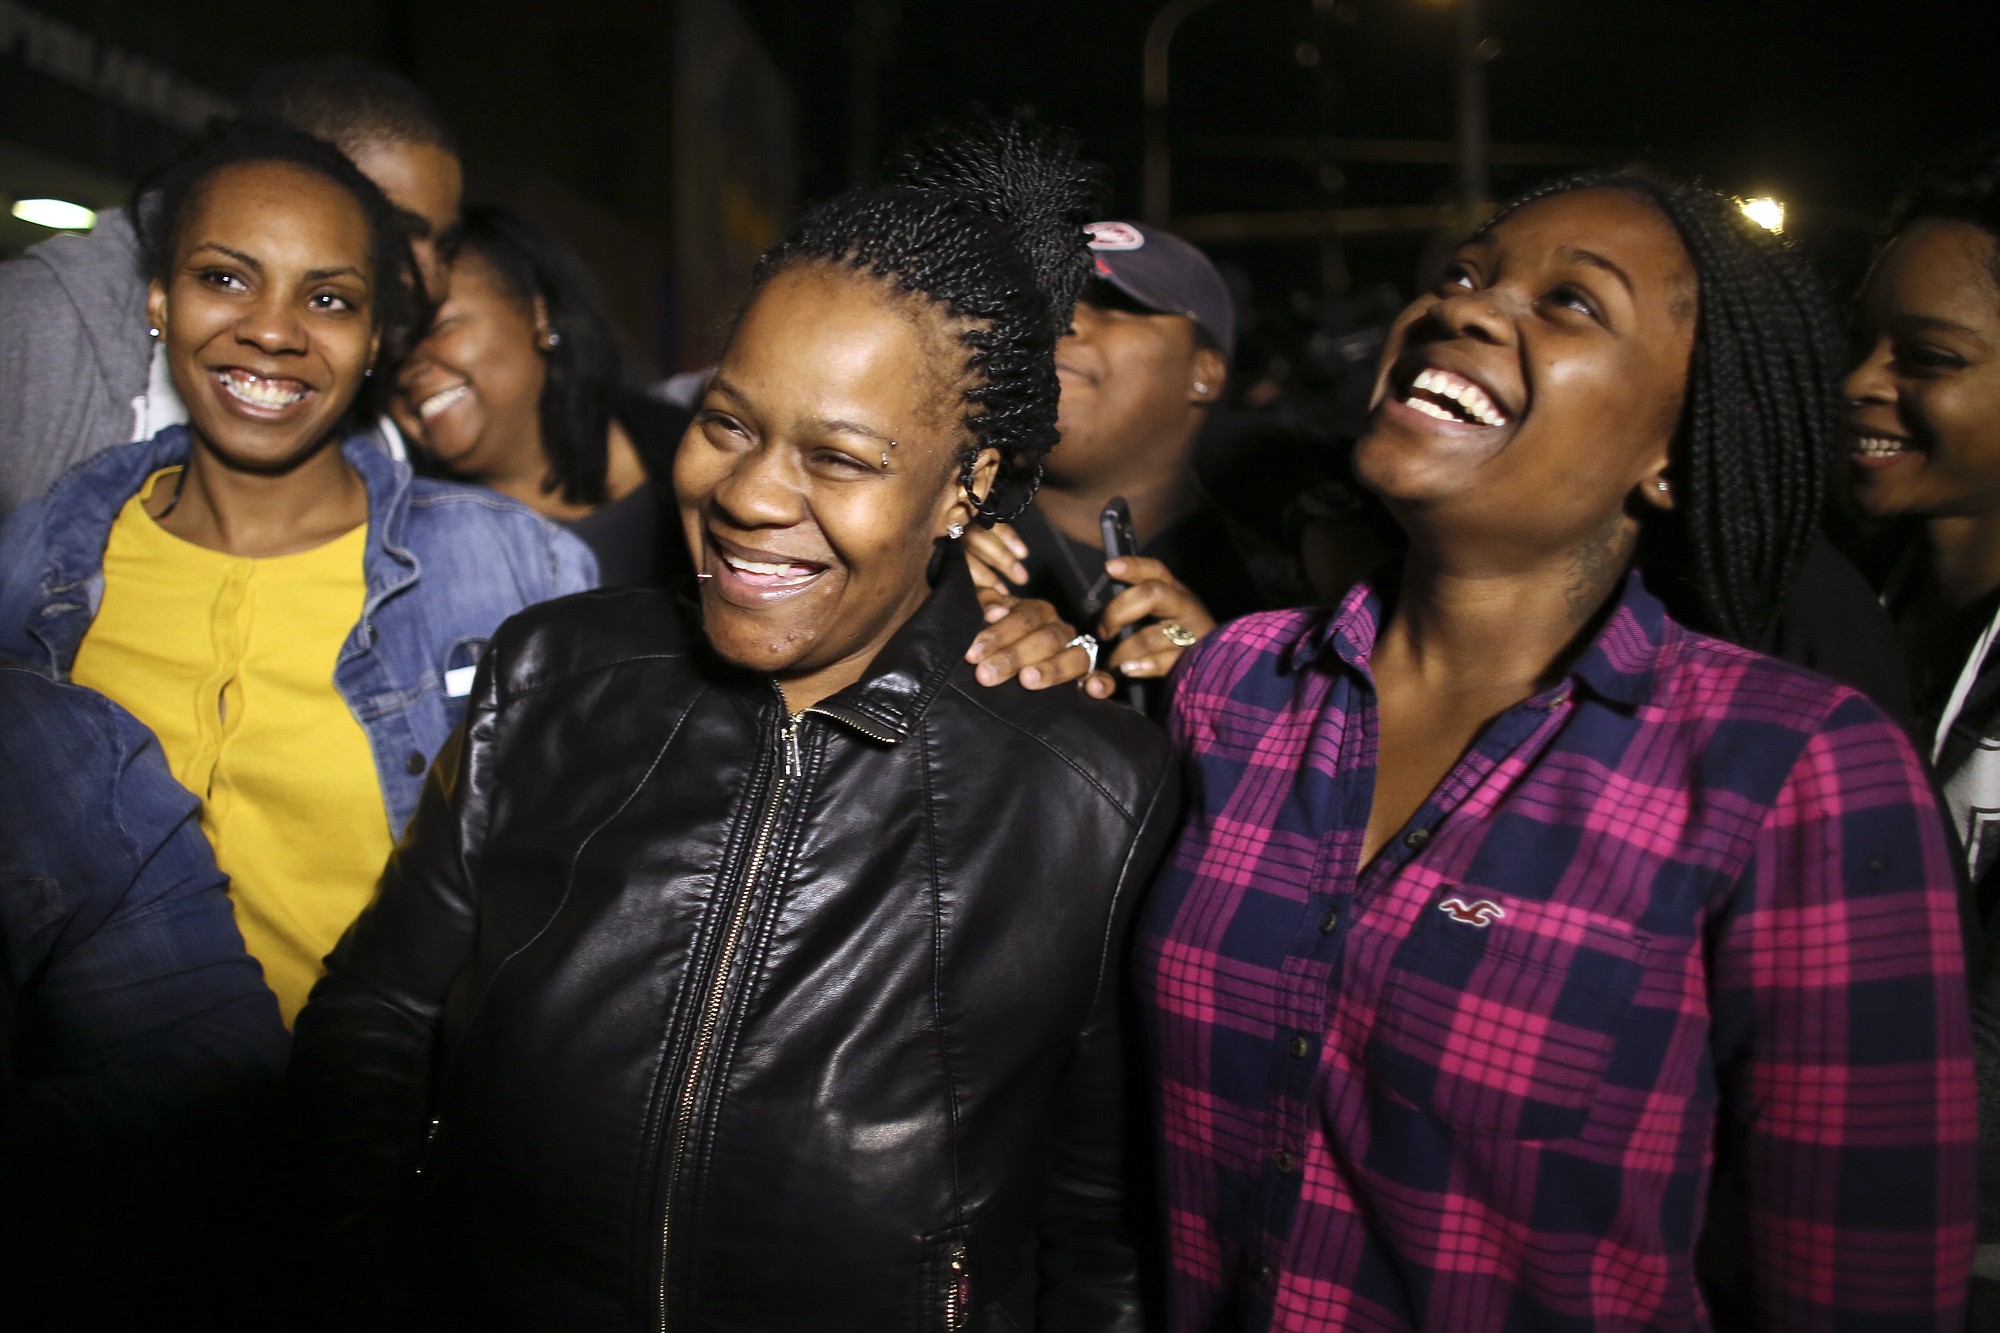 Family members surround Keisha Gaither, second from left, mother of kidnapping victim Carlesha Freeland-Gaither, as they celebrate Wednesday following a news conference in Philadelphia.